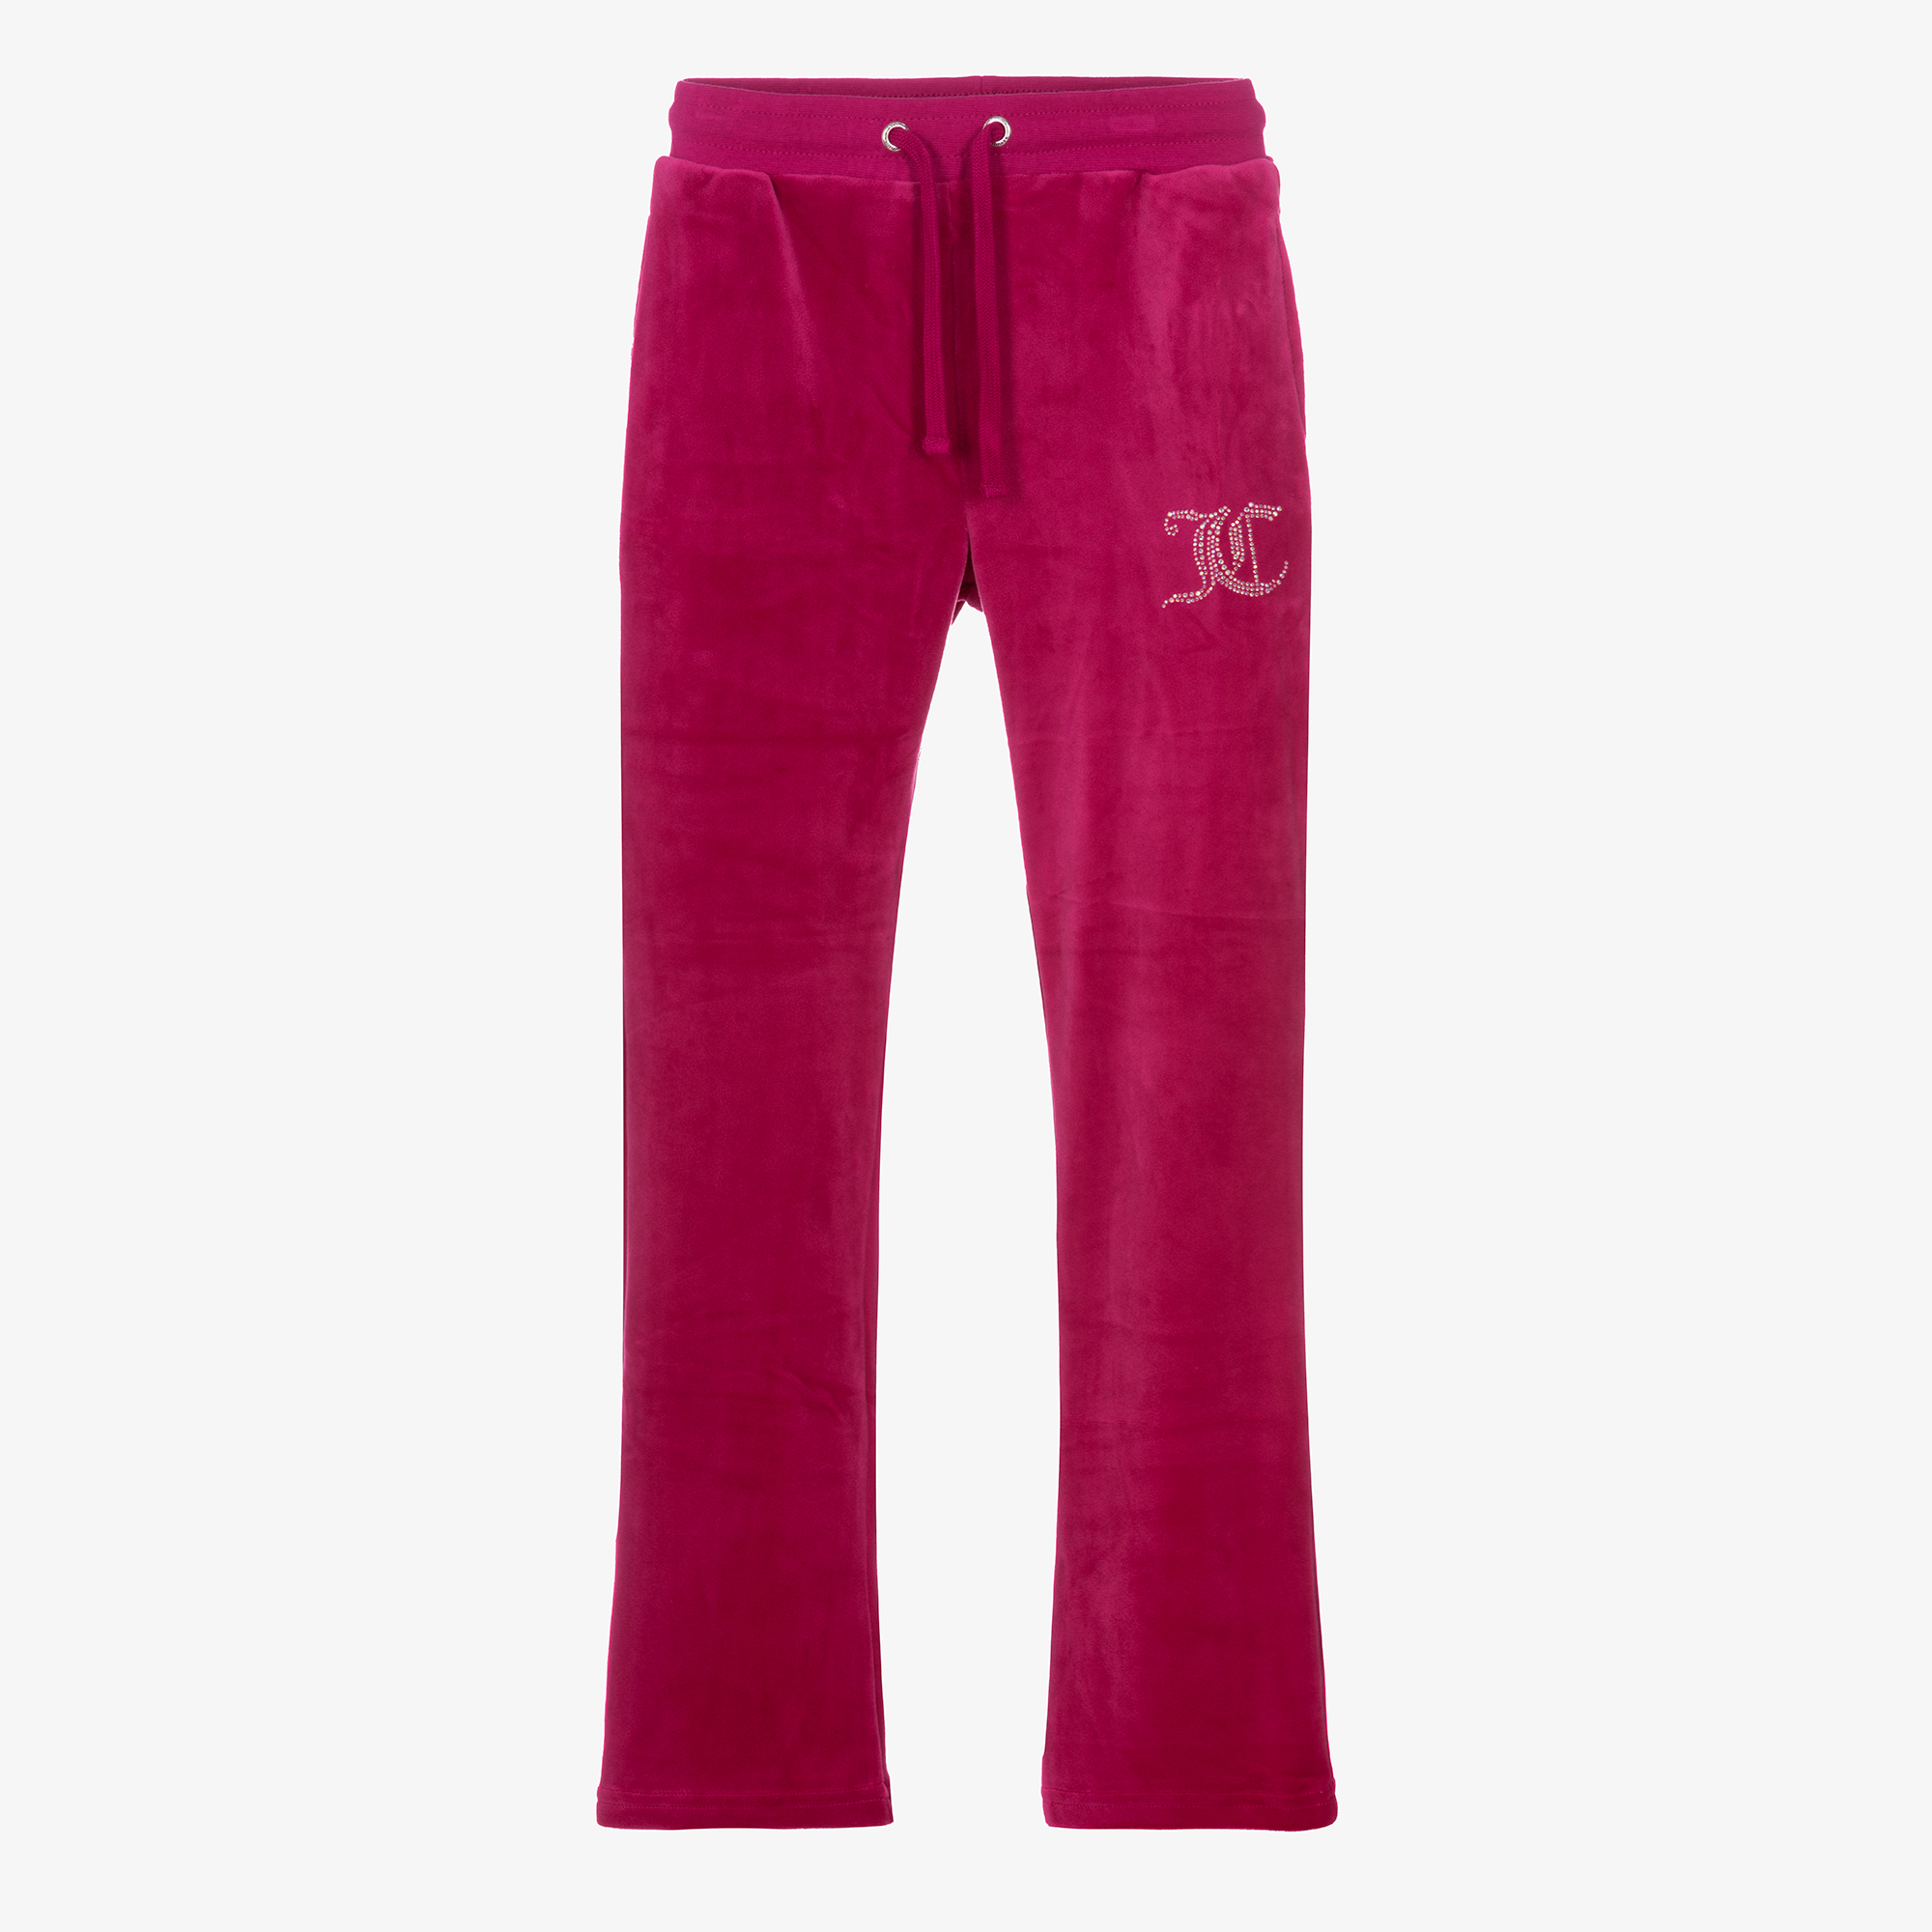 Juicy Couture - Teen Girls Pink Velour Joggers